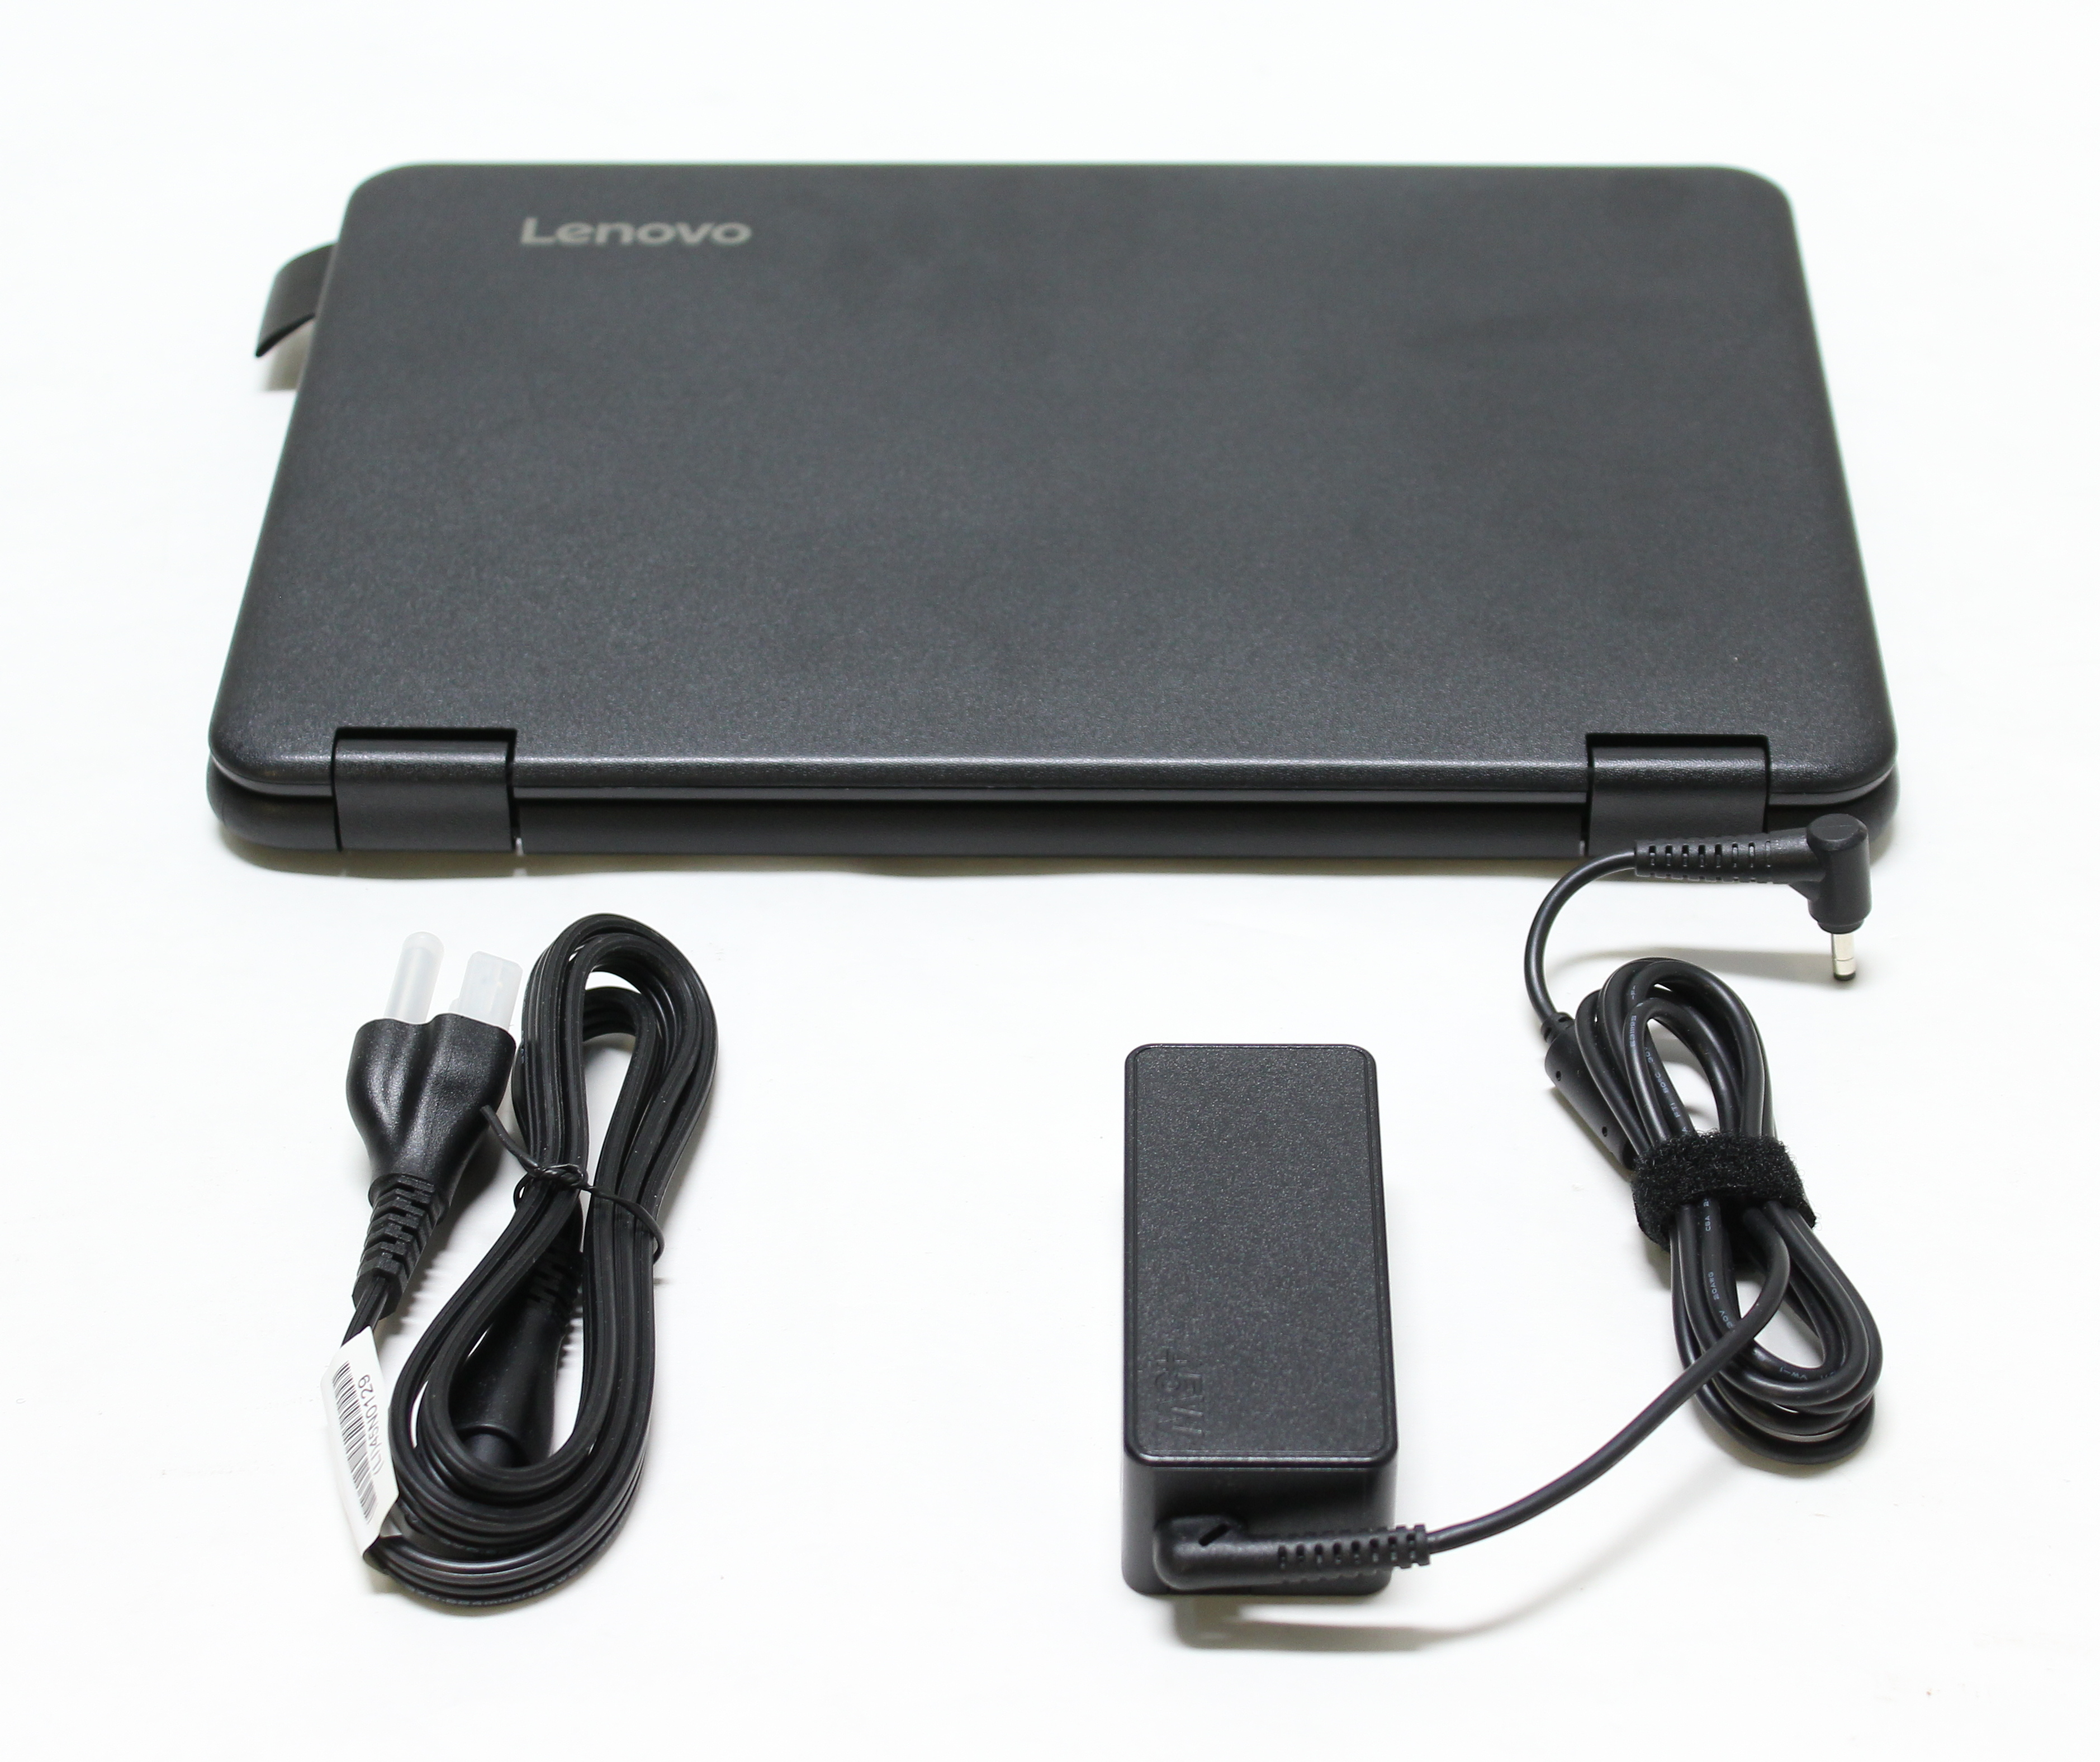 Lenovo 300e Winbook 11.6" Touchscreen LCD 2 in 1 Notebook CPU N3450 1.1GHZ RAM 4GB SANDISK 64GB 81FY000SUS